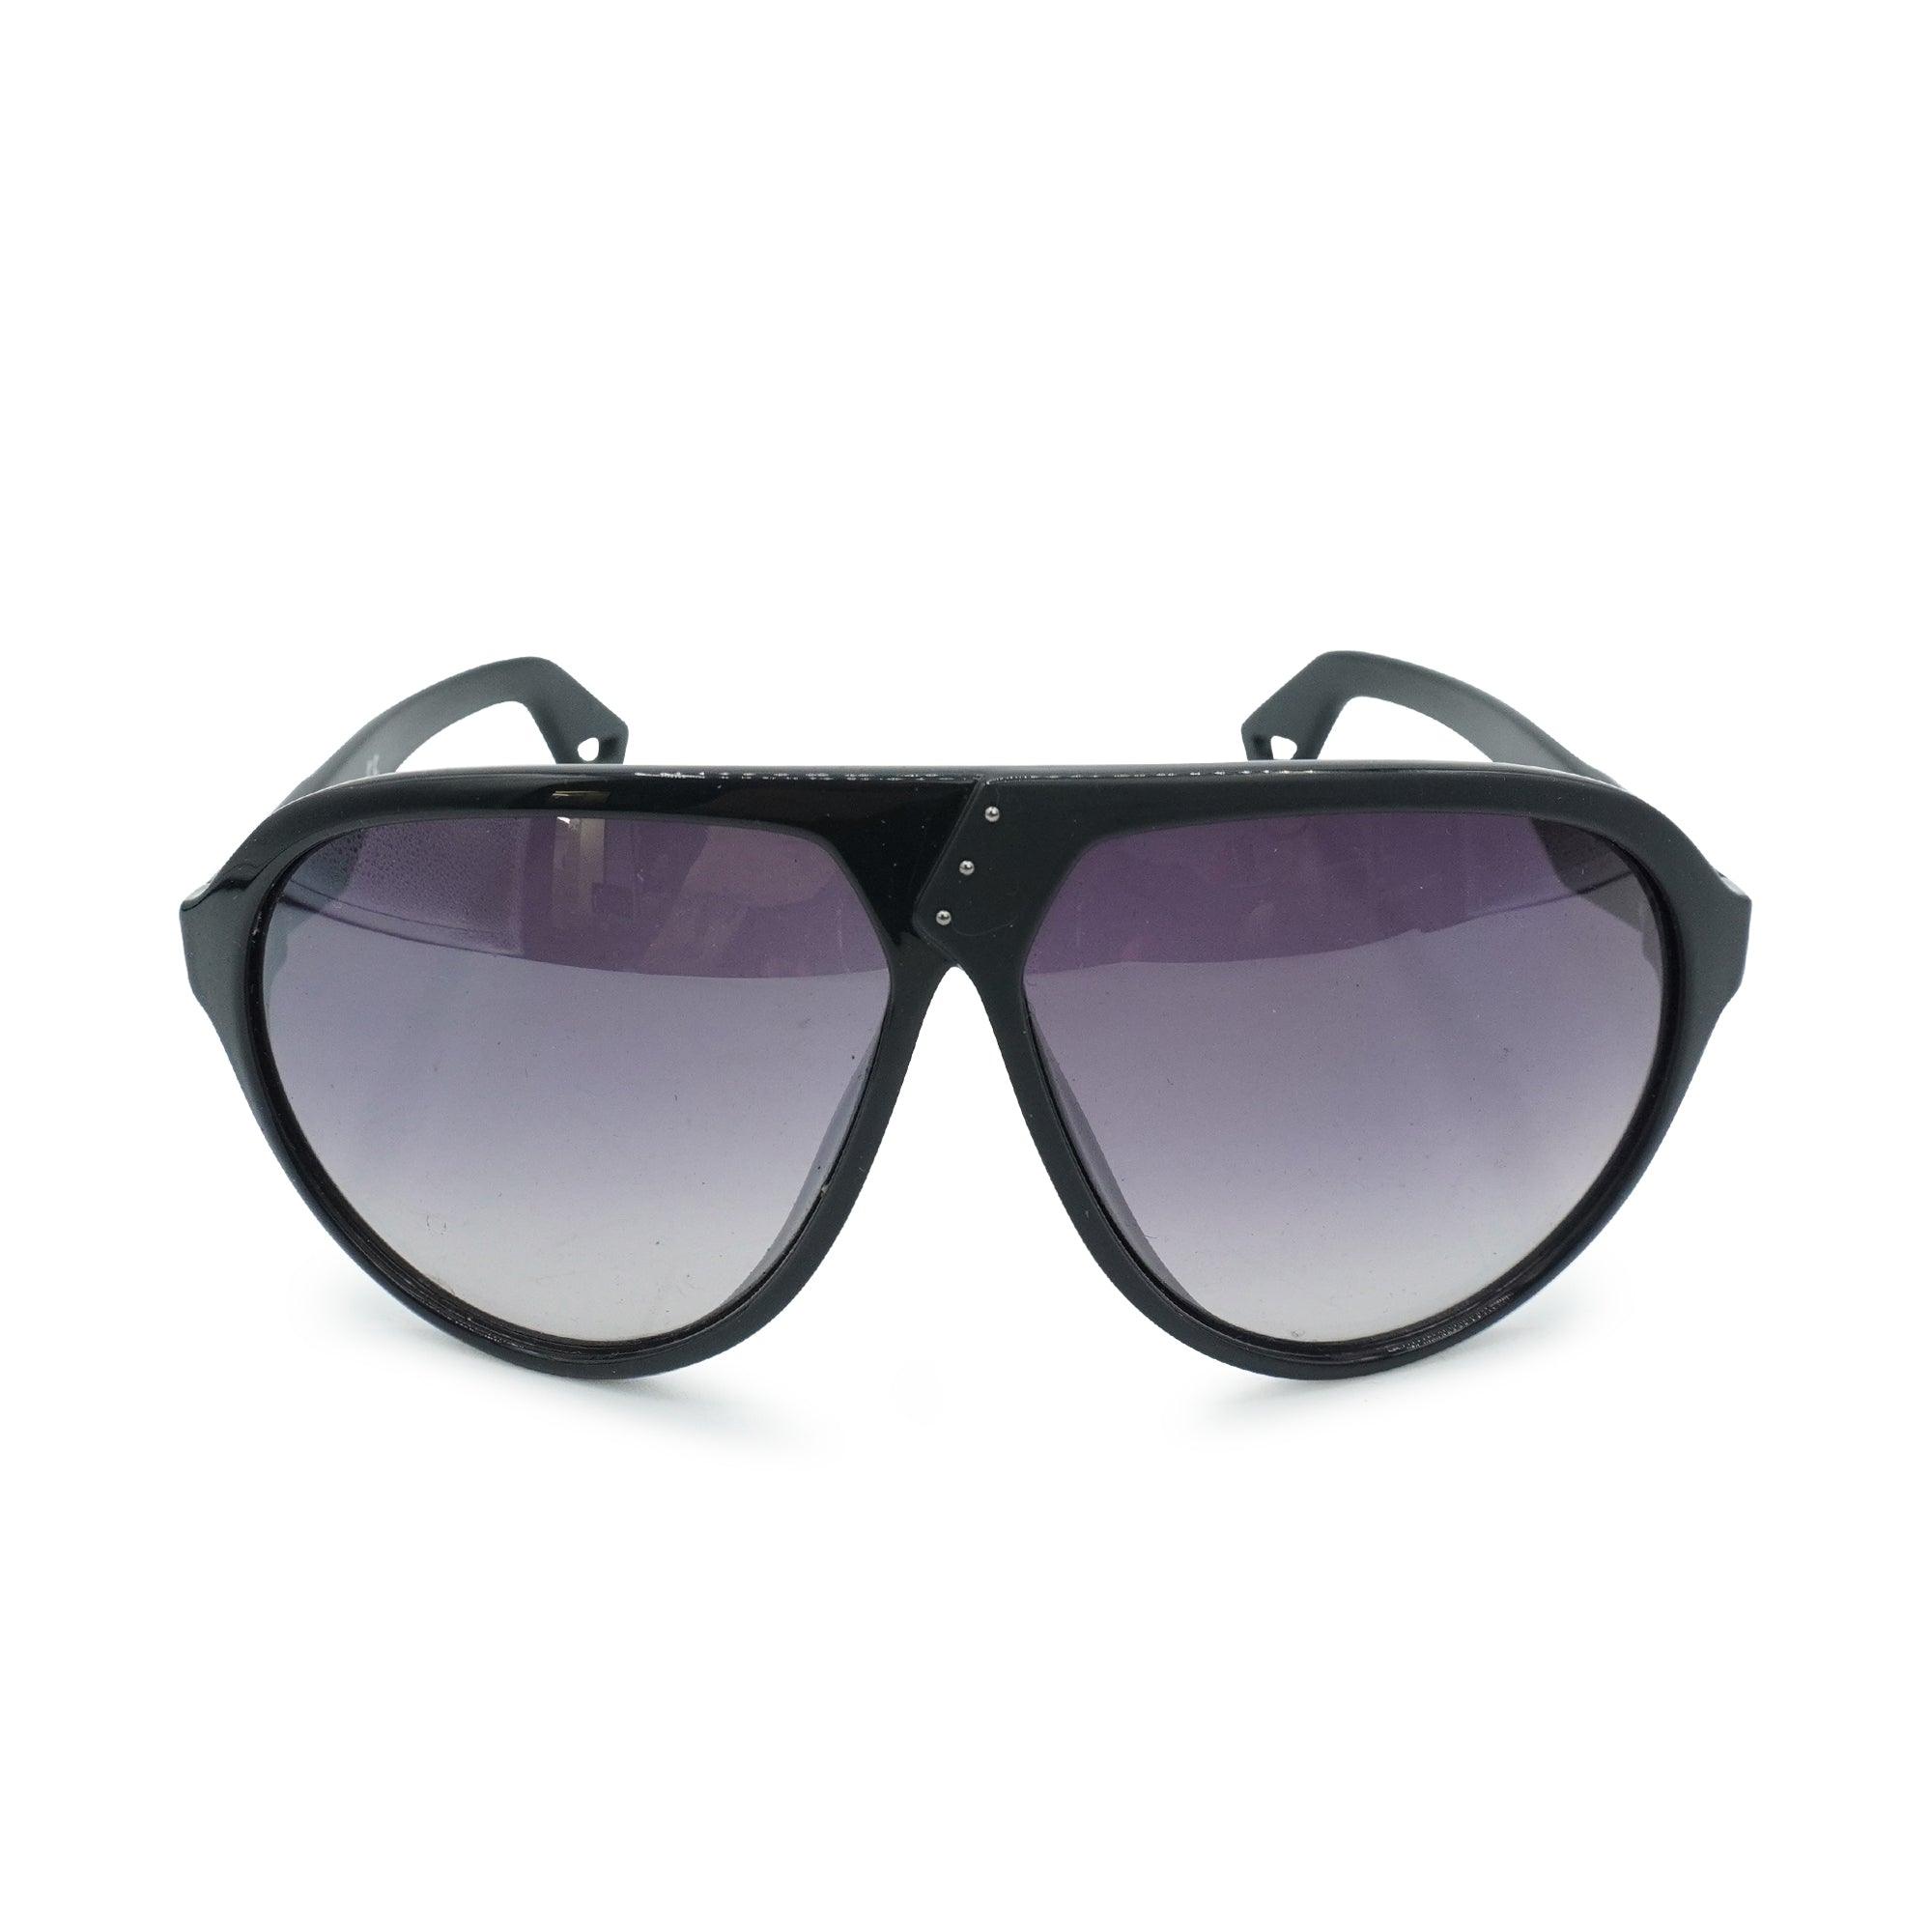 Diesel Sunglasses - Fashionably Yours